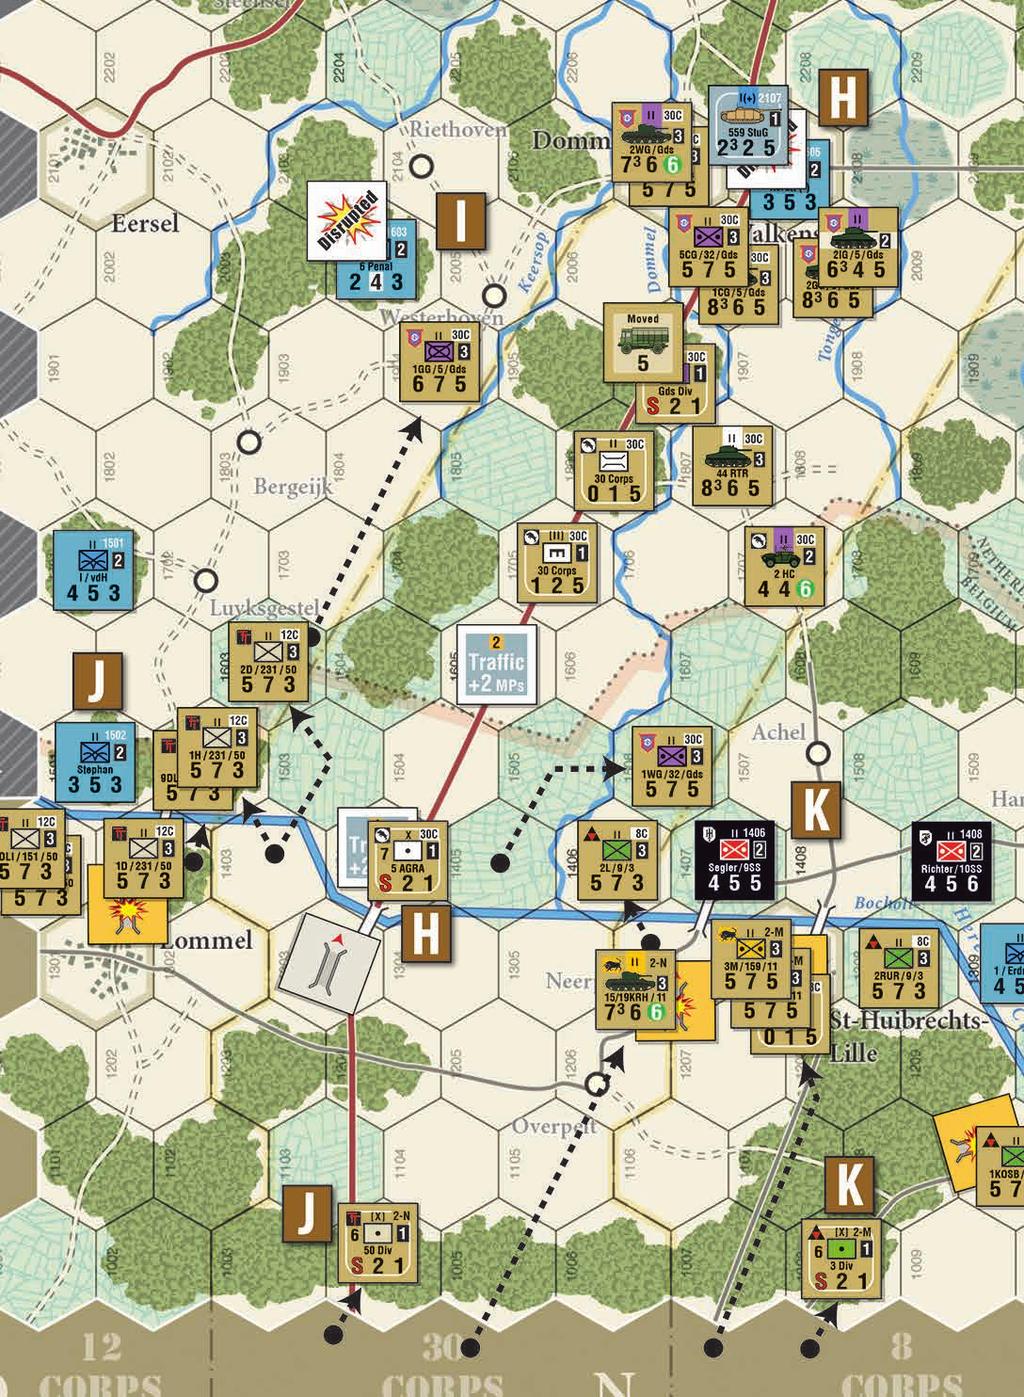 F: The 2/502/101 moves to attack the Unknown unit in Schijndel and does it during the Movement Phase. It turns out to be a 1-2-0 Flak unit, a Vehicle unit which is not doubled in the Town hex.